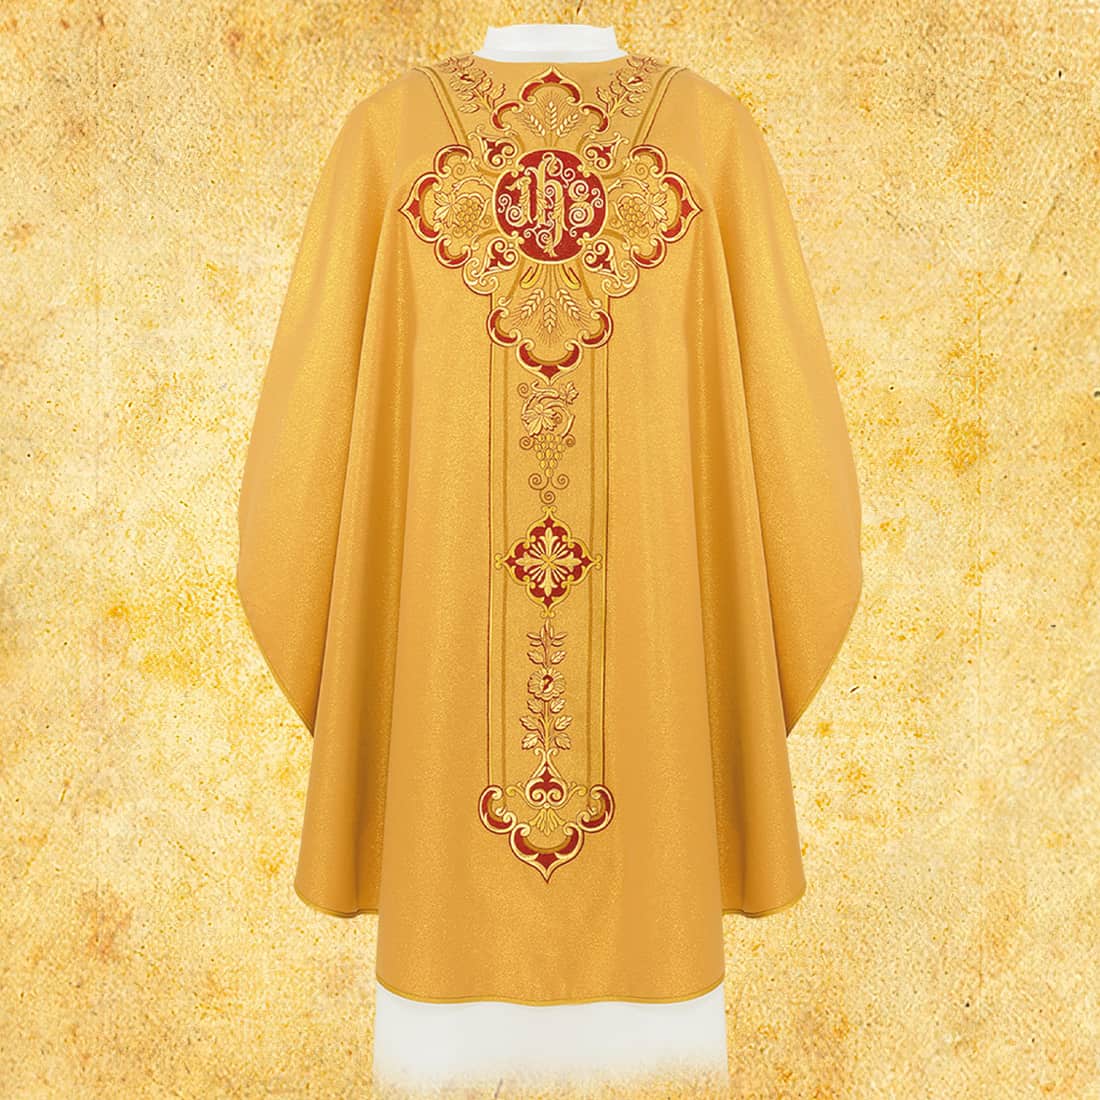 Embroidered chasuble "Vaticano"